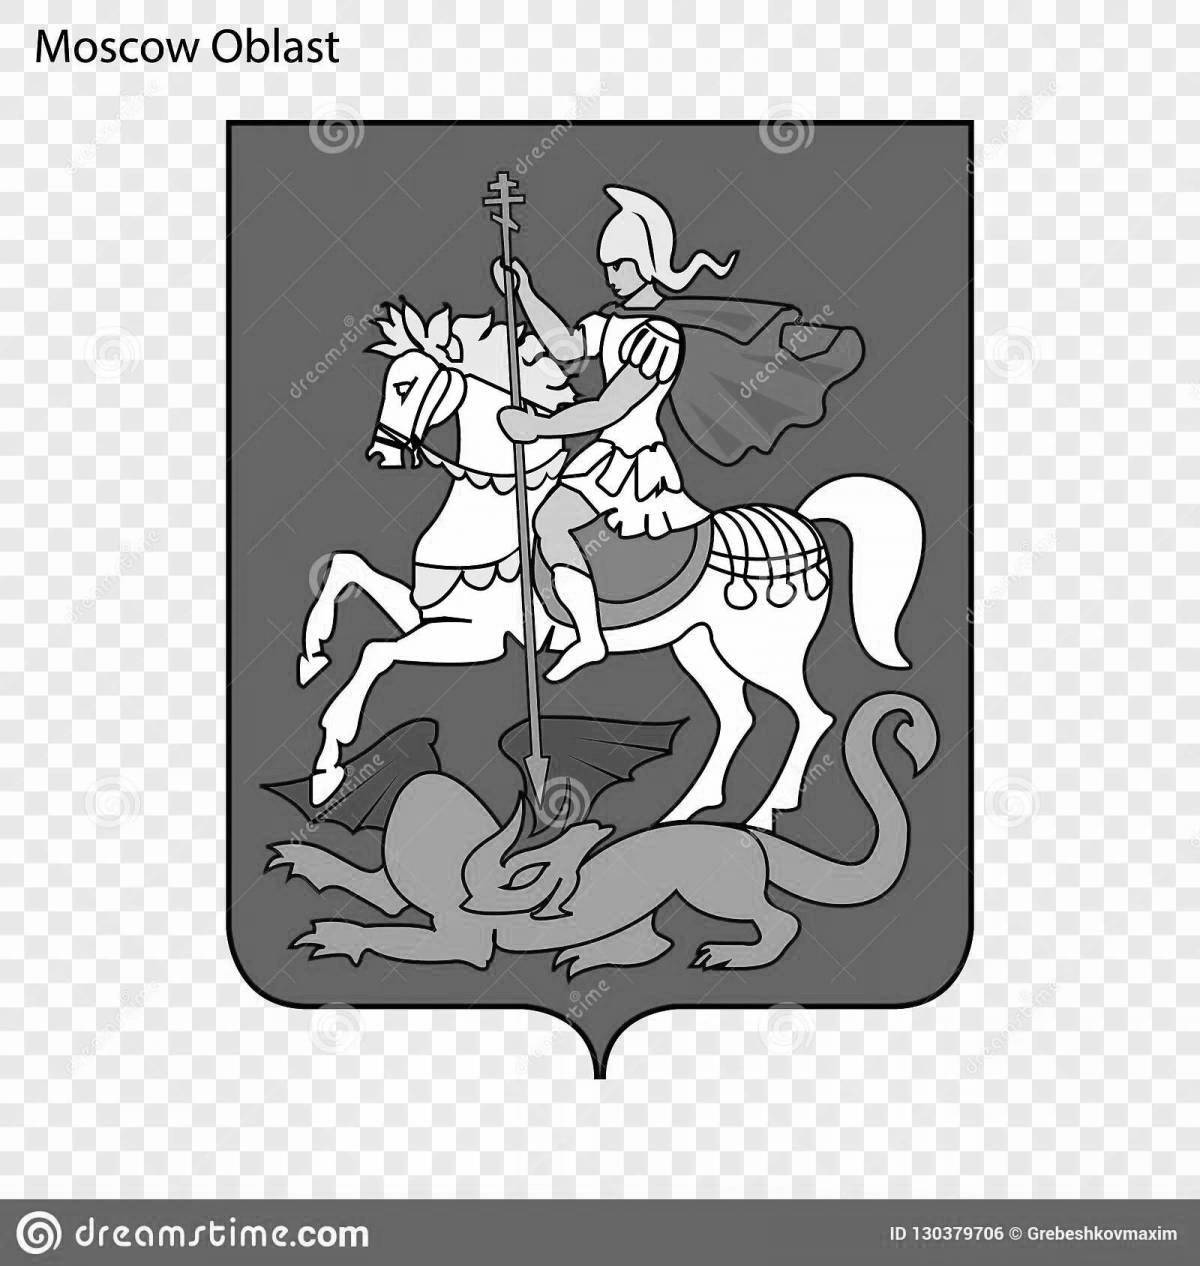 Exquisite coat of arms of moscow for juniors